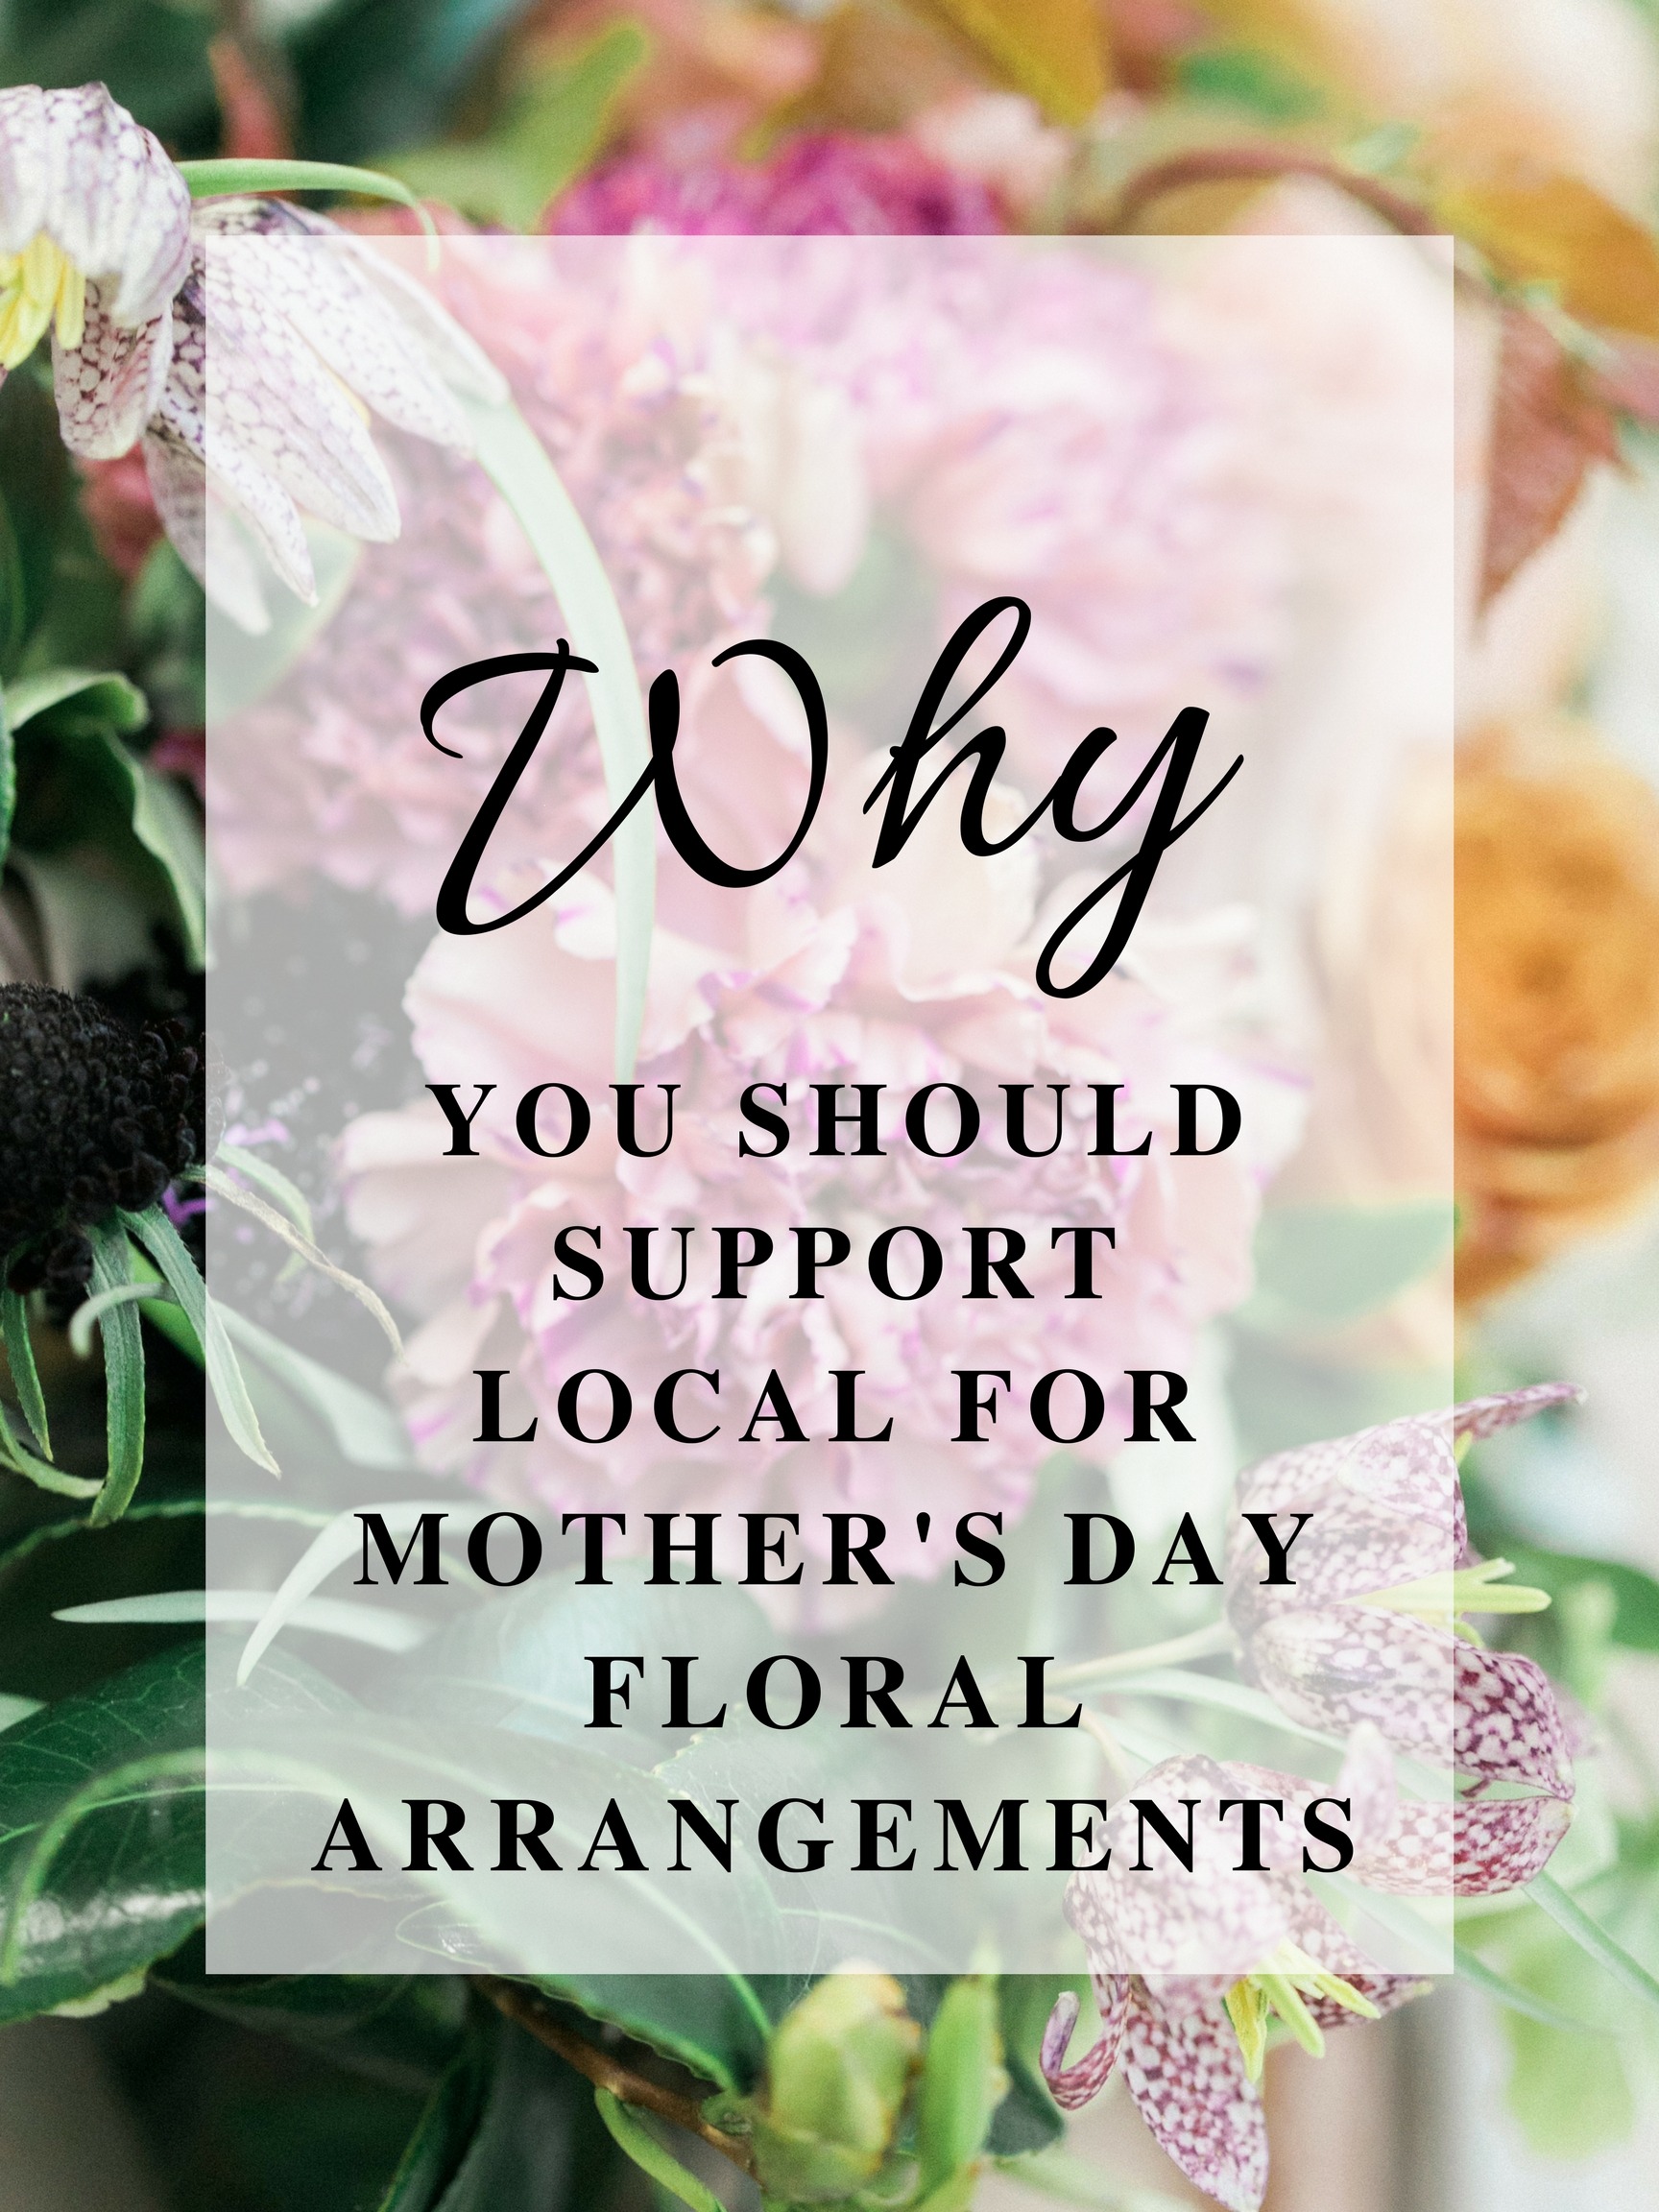 Why support local for mothers day